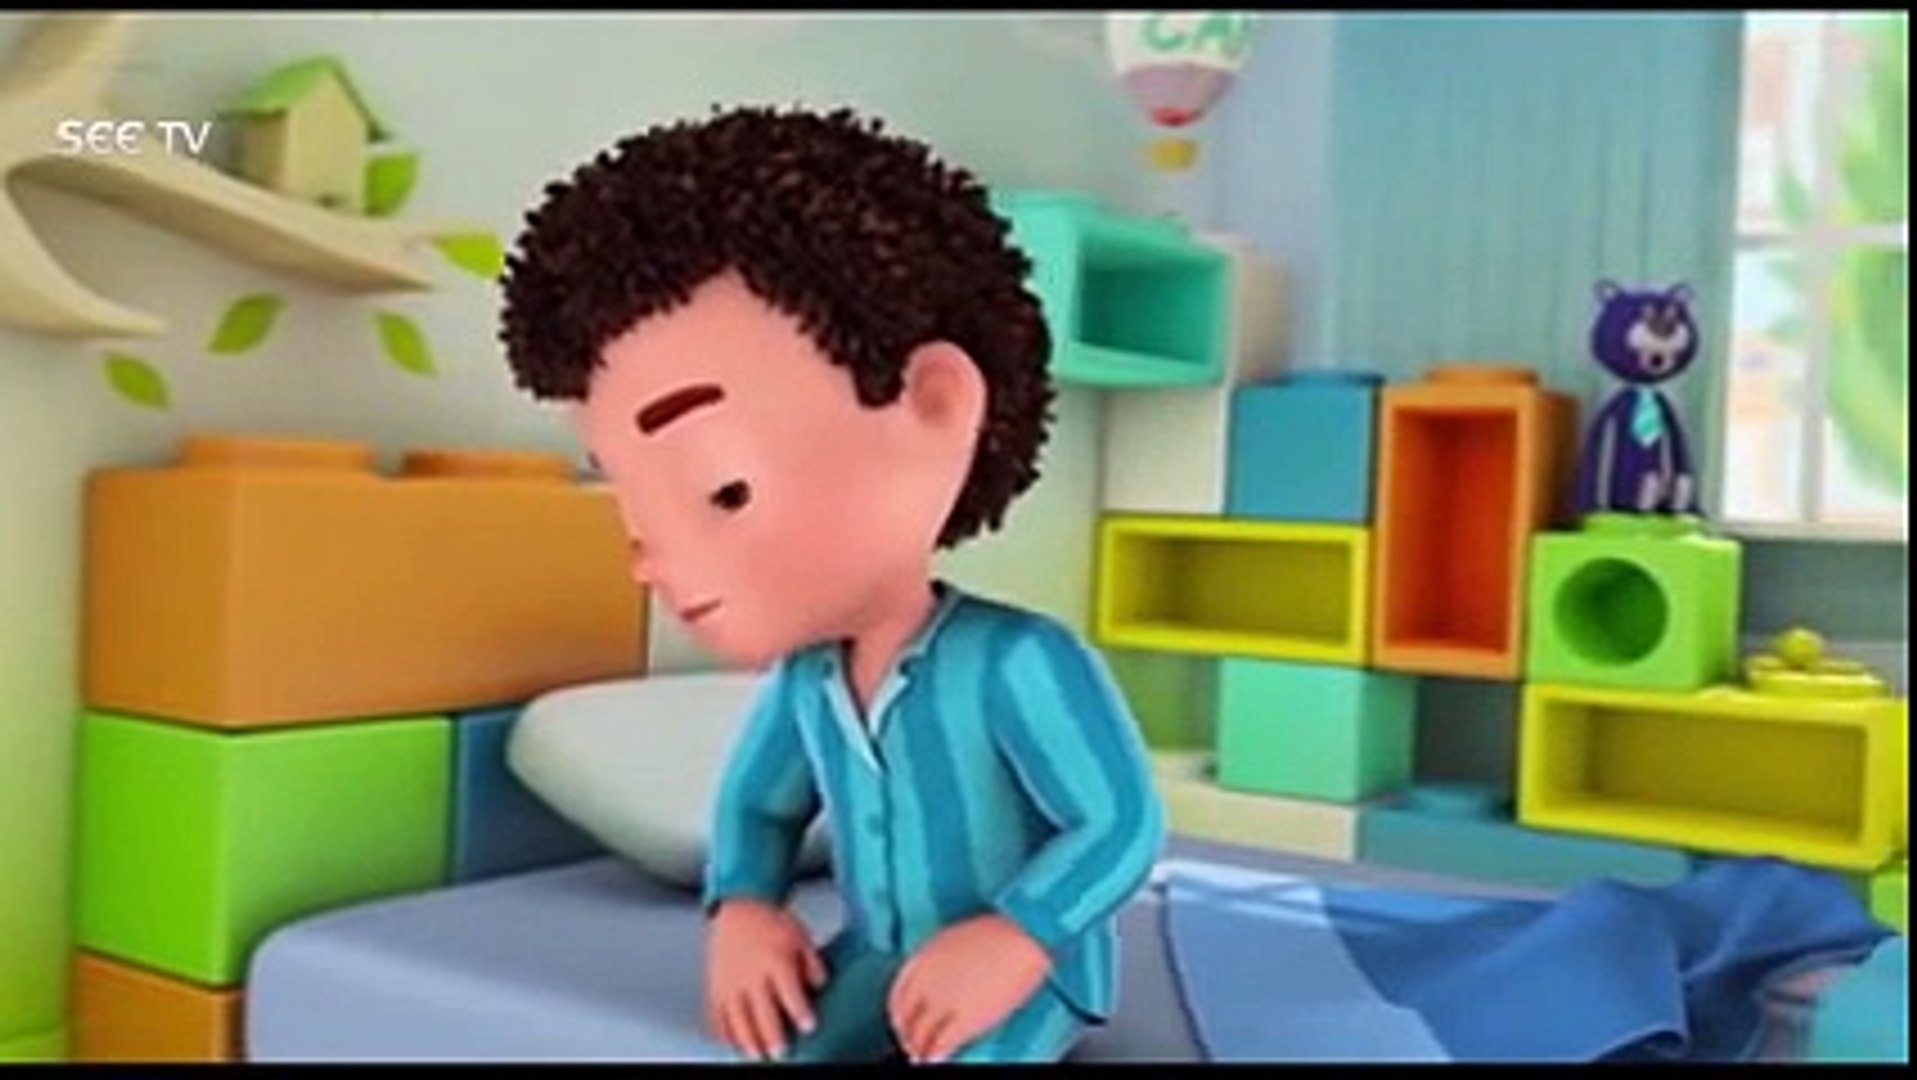 Jan Cartoon Ep-58 By SEE TV 6 Feb 2016-Hindi Urdu Famous Nursery Rhymes for  kids-Ten best Nursery Rhymes-English Phonic Songs-ABC Songs For children- Animated Alphabet Poems for Kids-Baby HD cartoons-Best Learning HD video